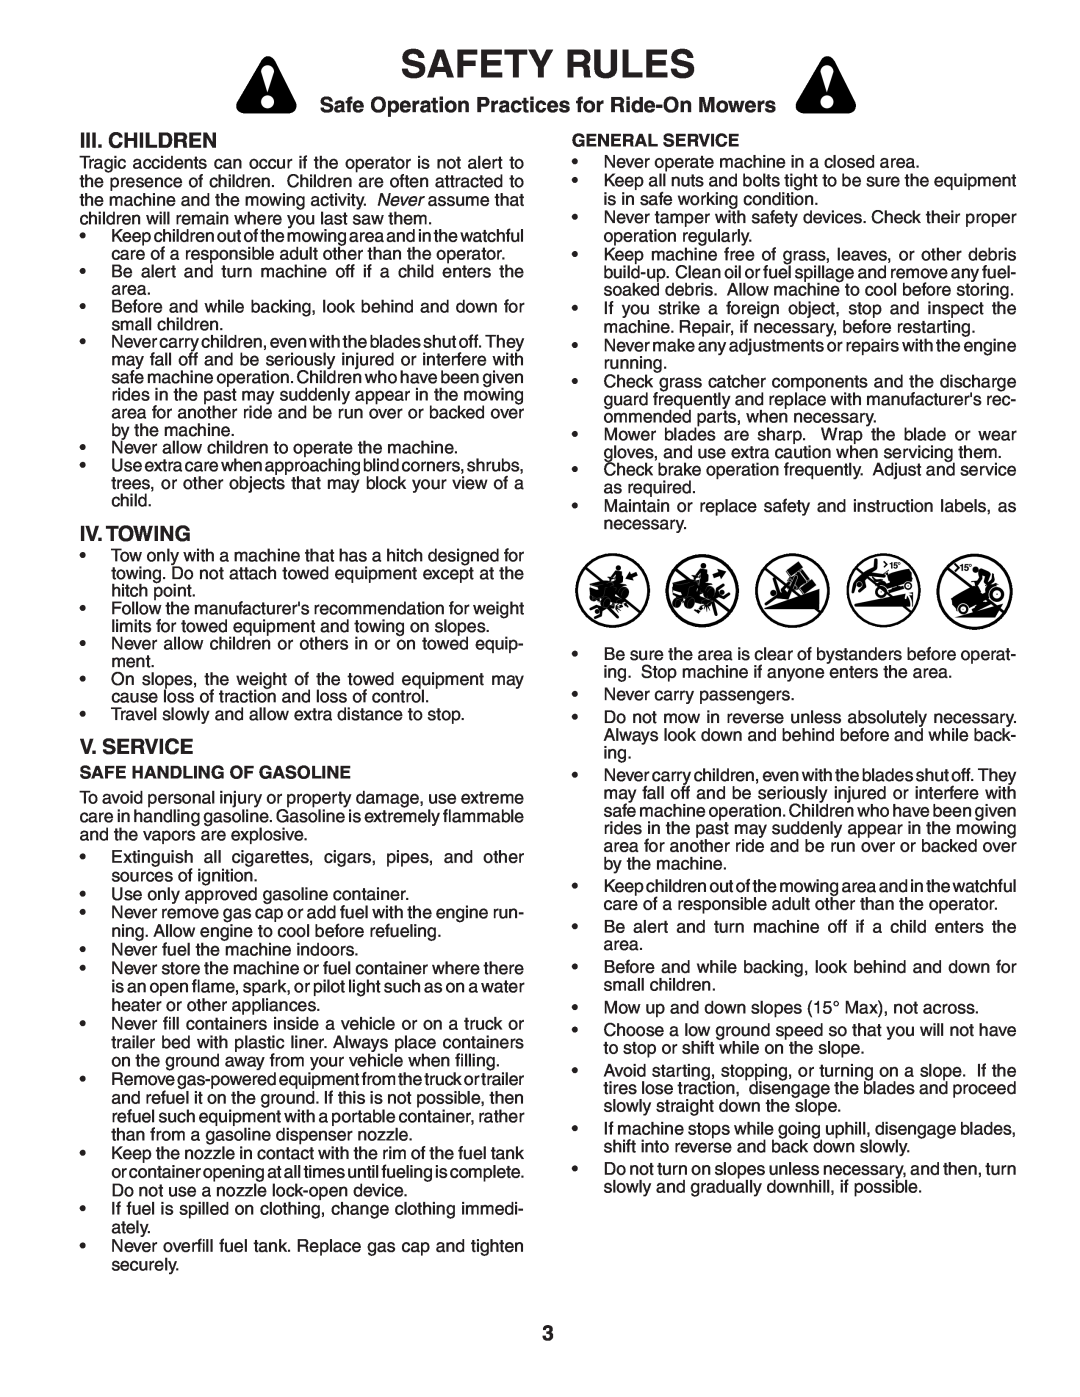 Poulan PB20H42YT manual Iii. Children, Iv. Towing, V. Service, Safety Rules, Safe Operation Practices for Ride-OnMowers 